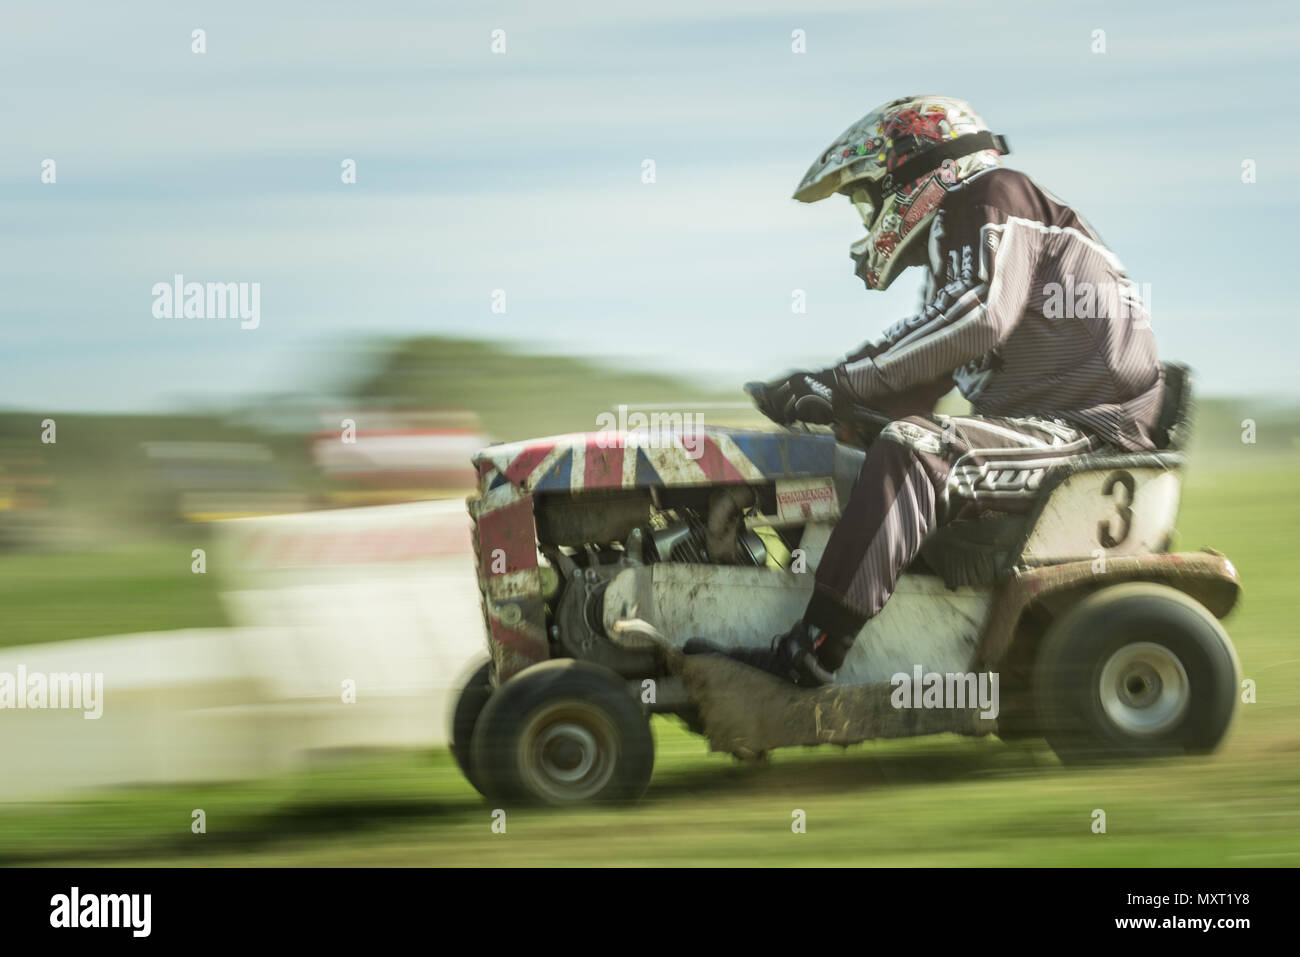 Five Oaks, Nr Billingshurst, West Sussex, UK. September 24th 2016.  Competitors take part in the Lawn Mower Racing World Championships at Five Oaks ne Stock Photo